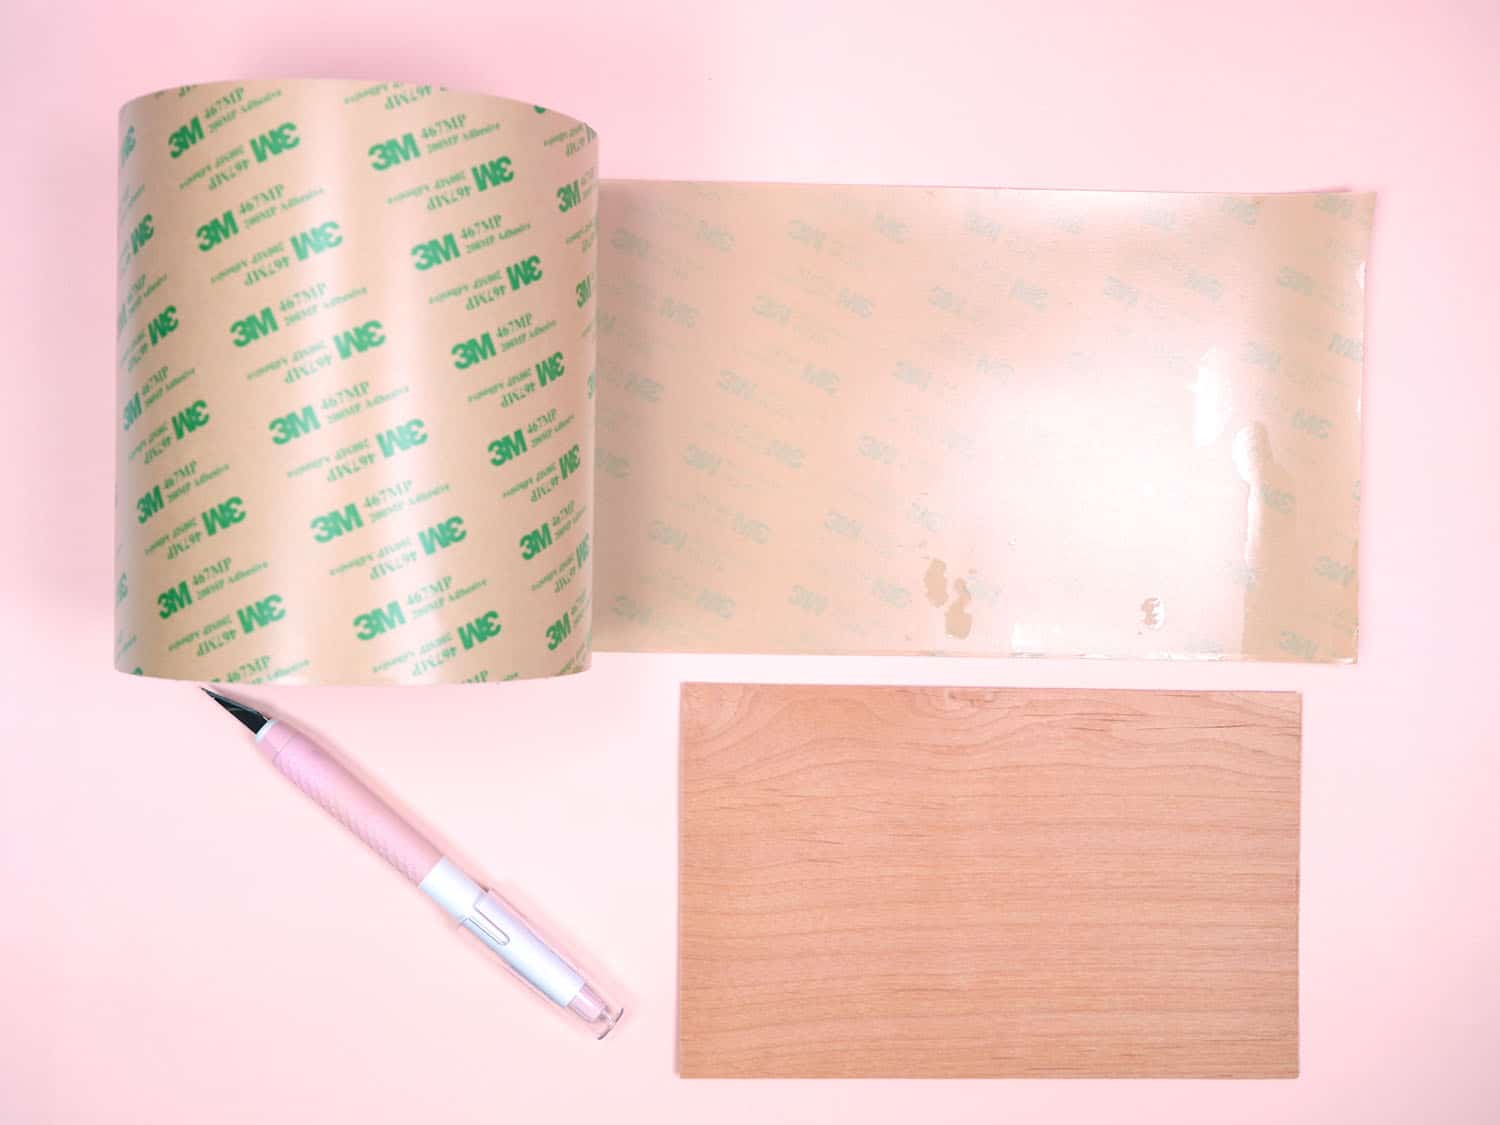 Partially unrolled roll of 3M tape, sheet of wood veneer, and craft knife on pink background